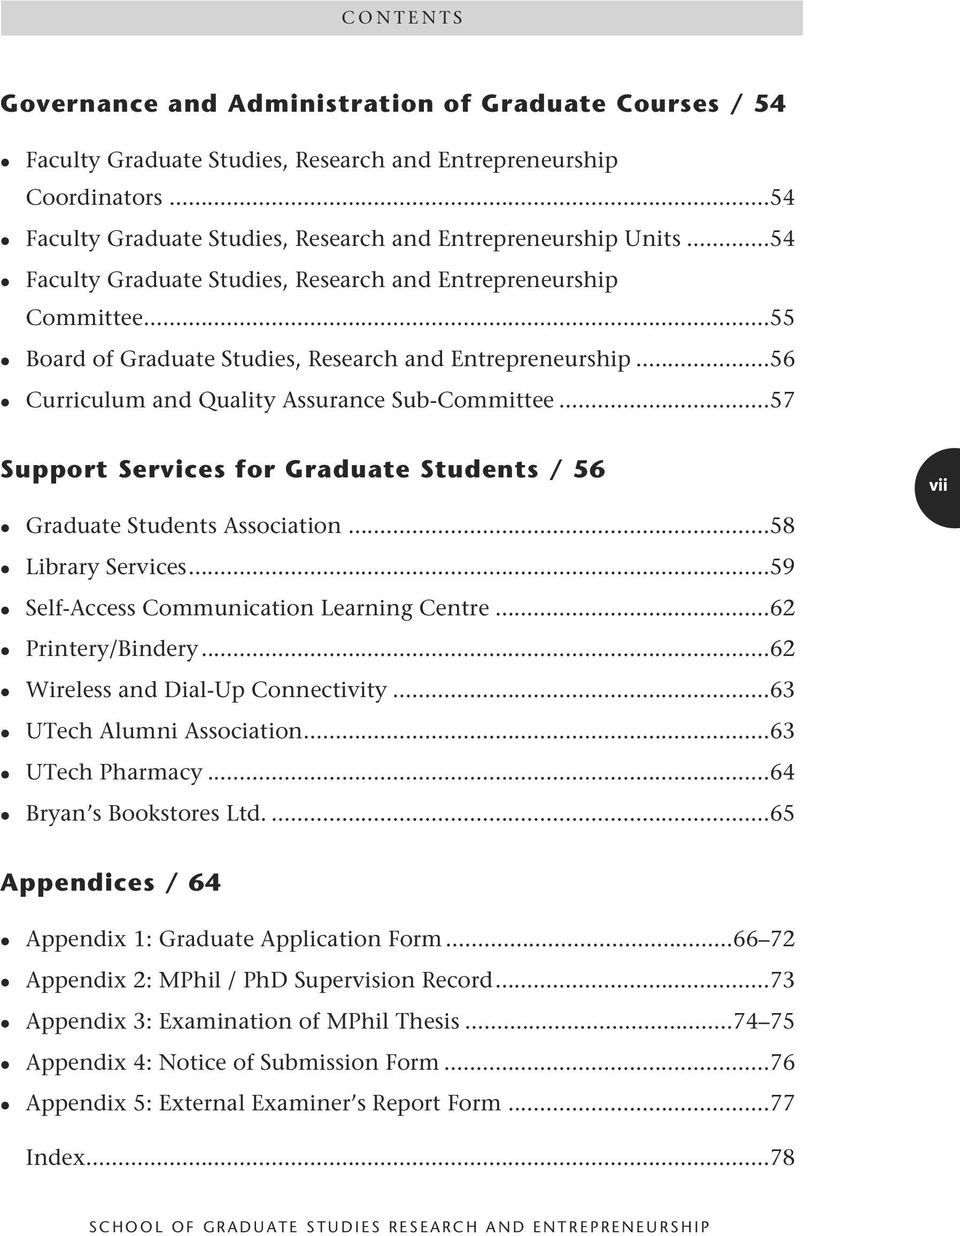 ..56 Curriculum and Quality Assurance Sub-Committee...57 Support Services for Graduate Students / 56 vii Graduate Students Association...58 Library Services.